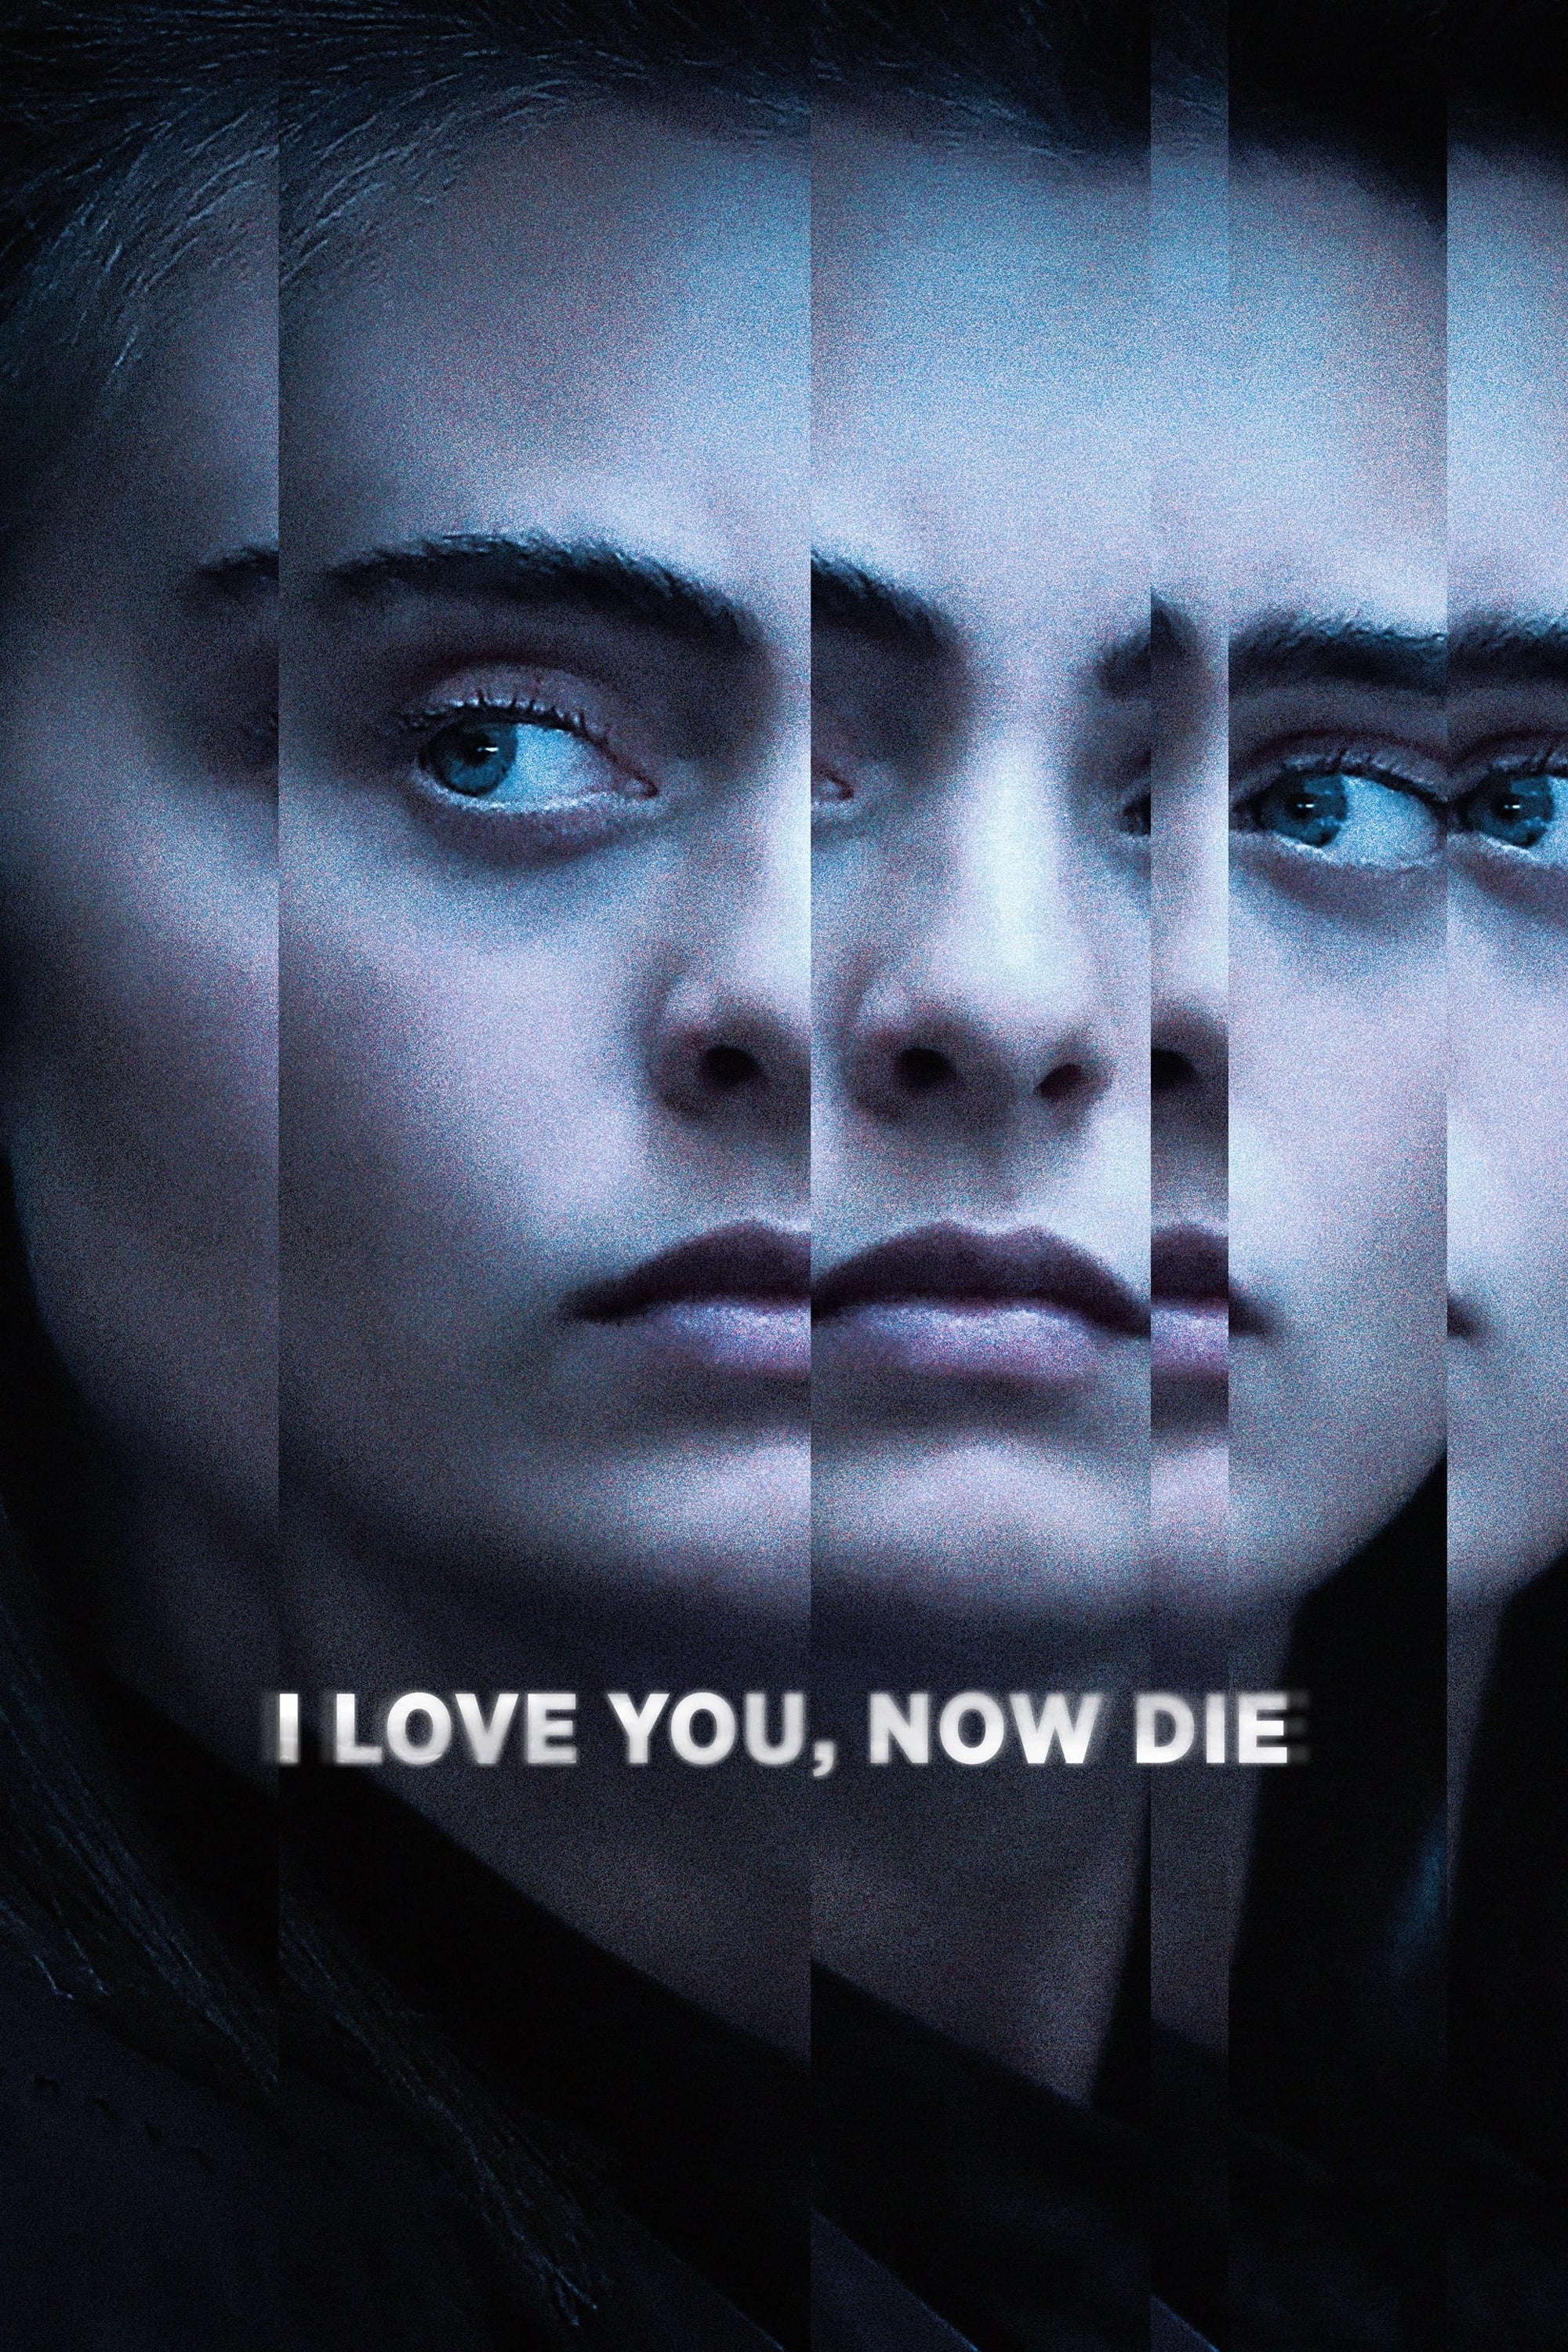 I Love You, Now Die: The Commonwealth v. Michelle Carter TV Shows About Court